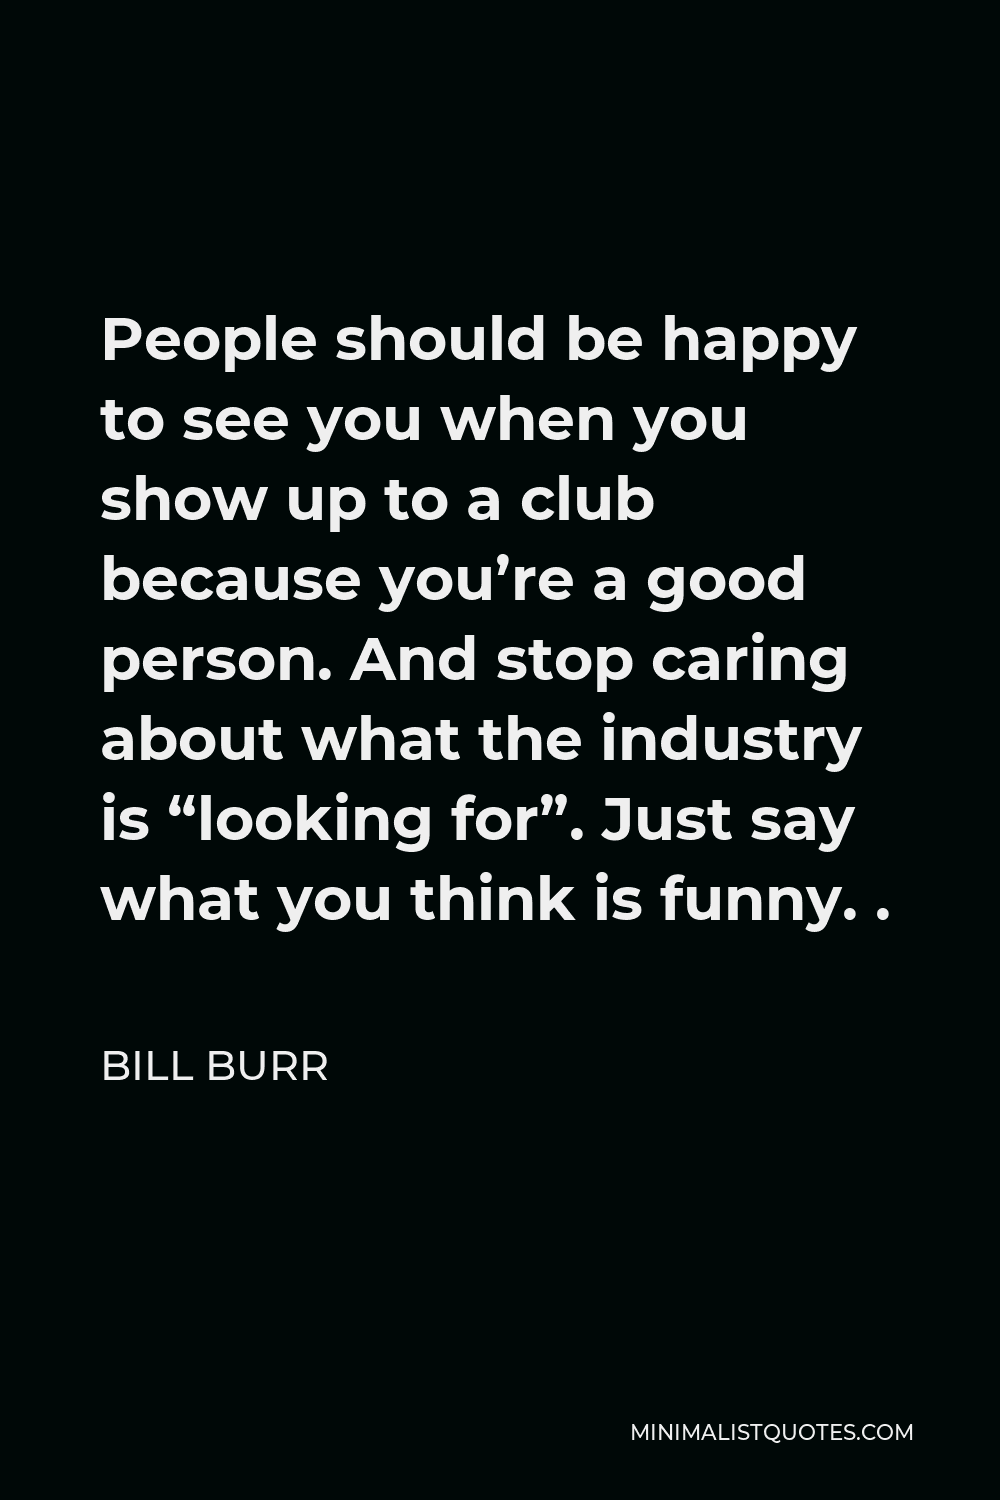 Bill Burr Quote - People should be happy to see you when you show up to a club because you’re a good person. And stop caring about what the industry is “looking for”. Just say what you think is funny. .